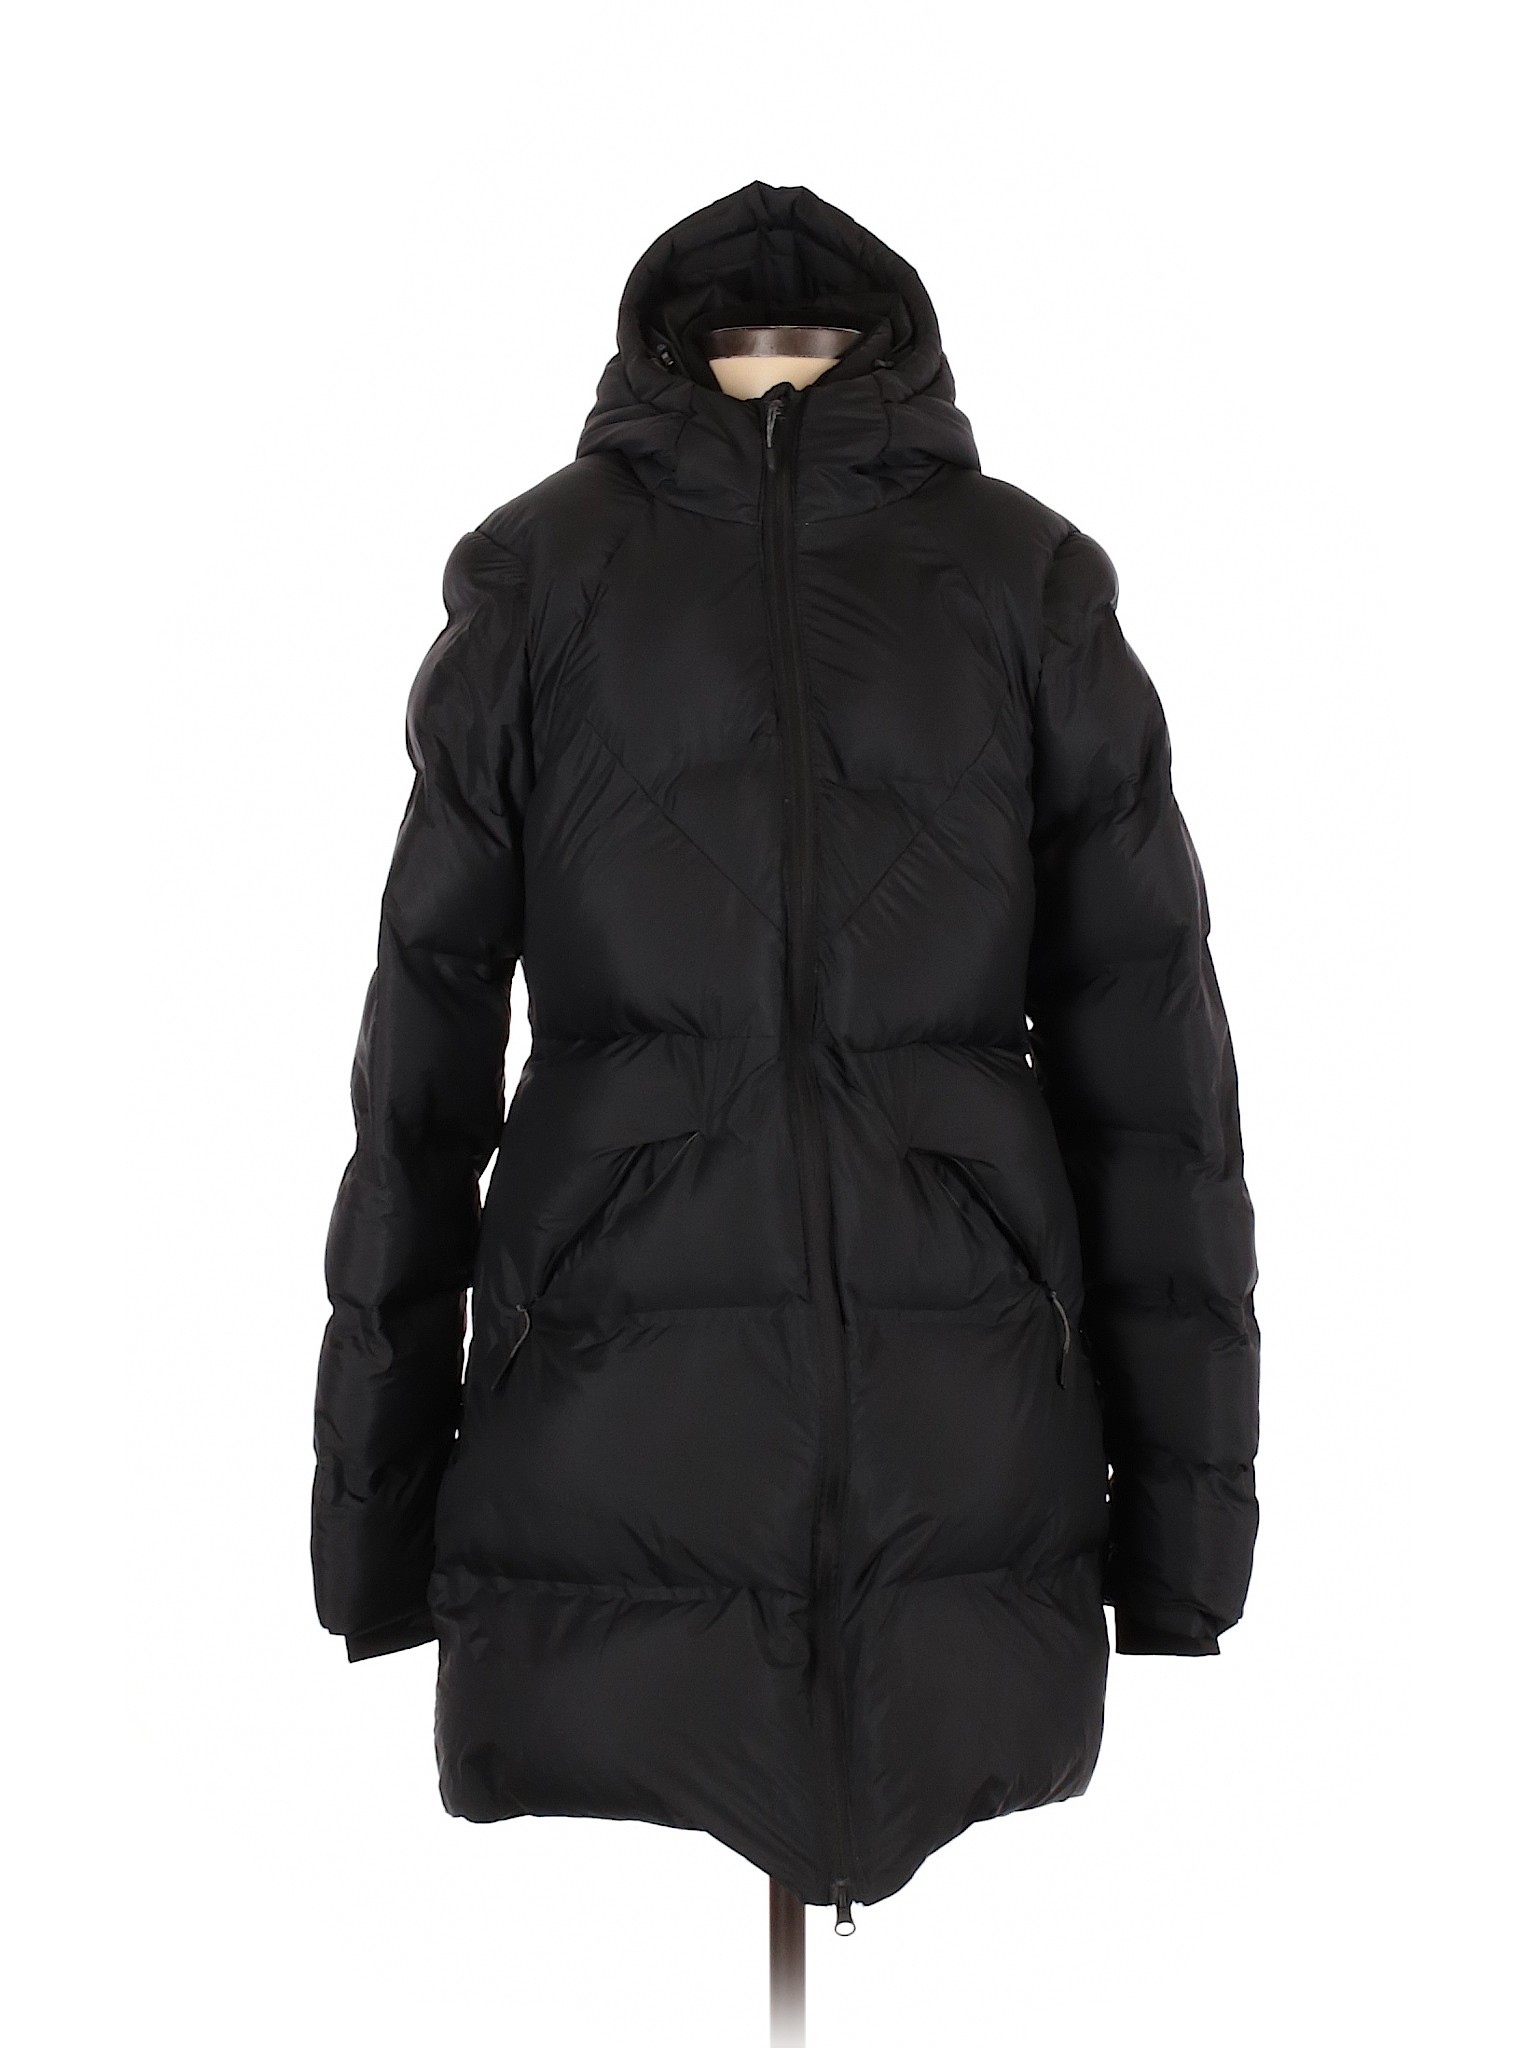 C9 By Champion 100% Polyester Solid Black Snow Jacket Size M - 55% off ...